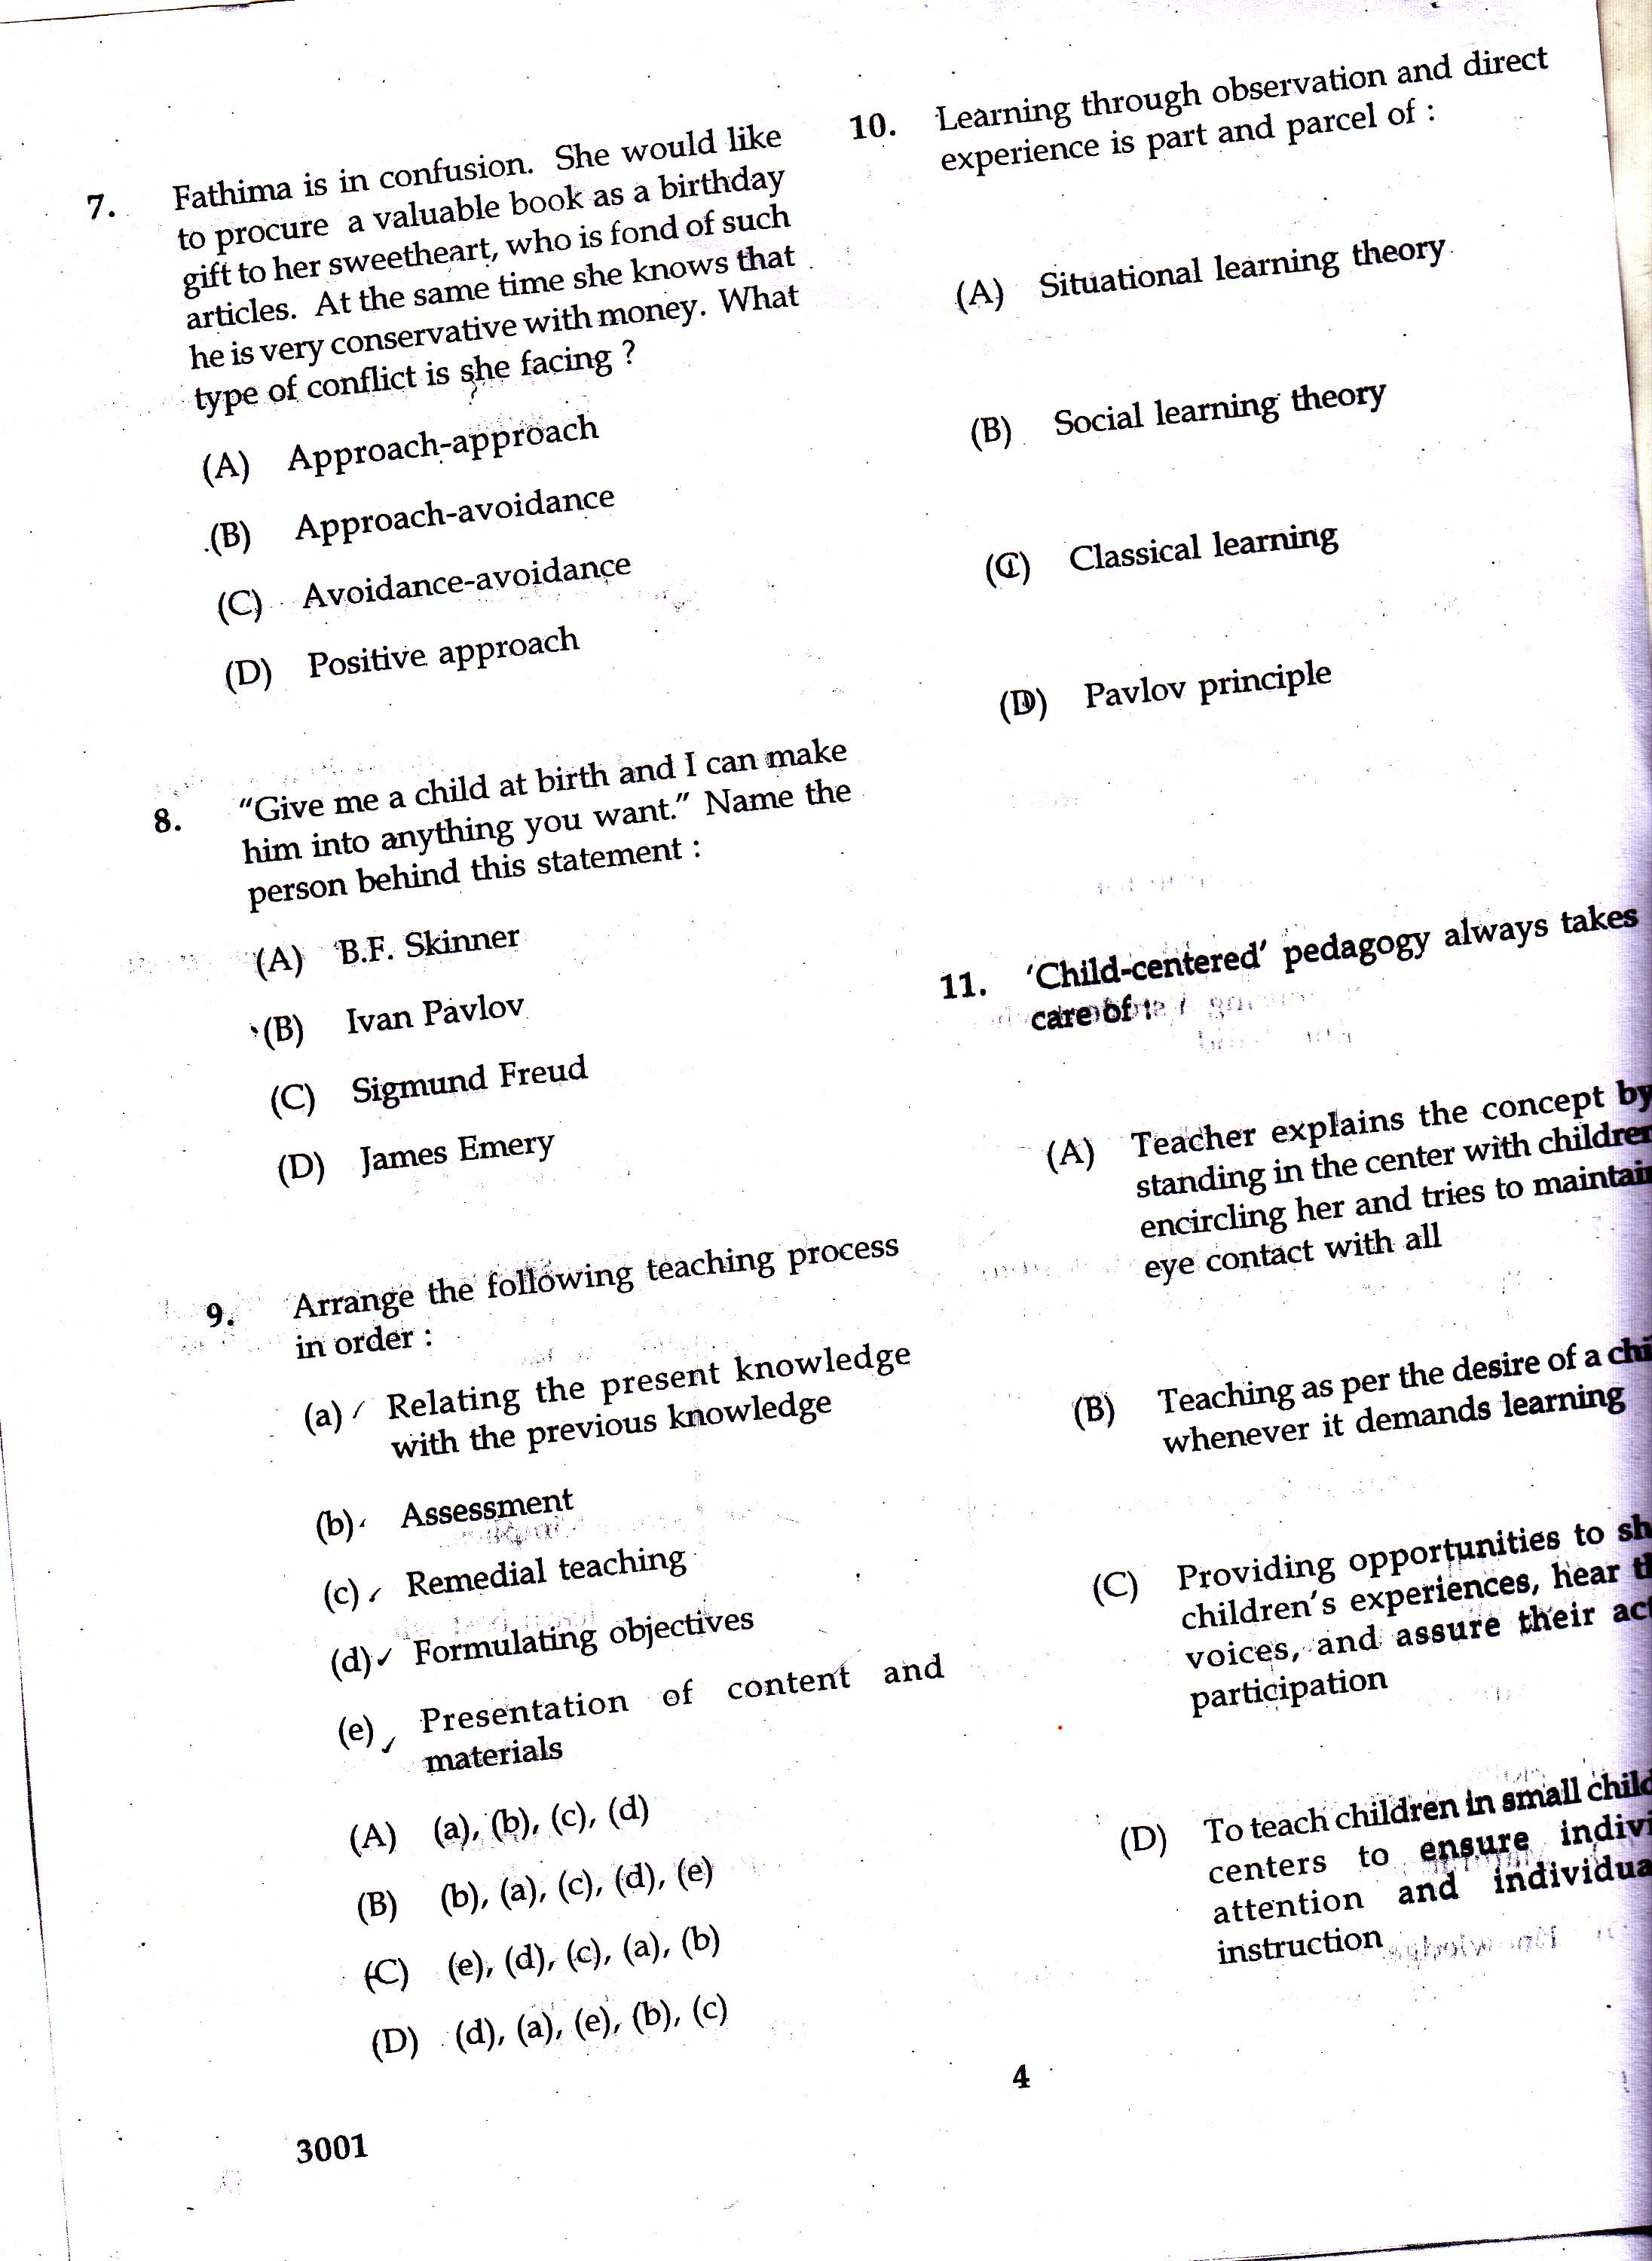 KTET Category III Part 1 Adolescent Psychology Question Paper with Answers 2017 2